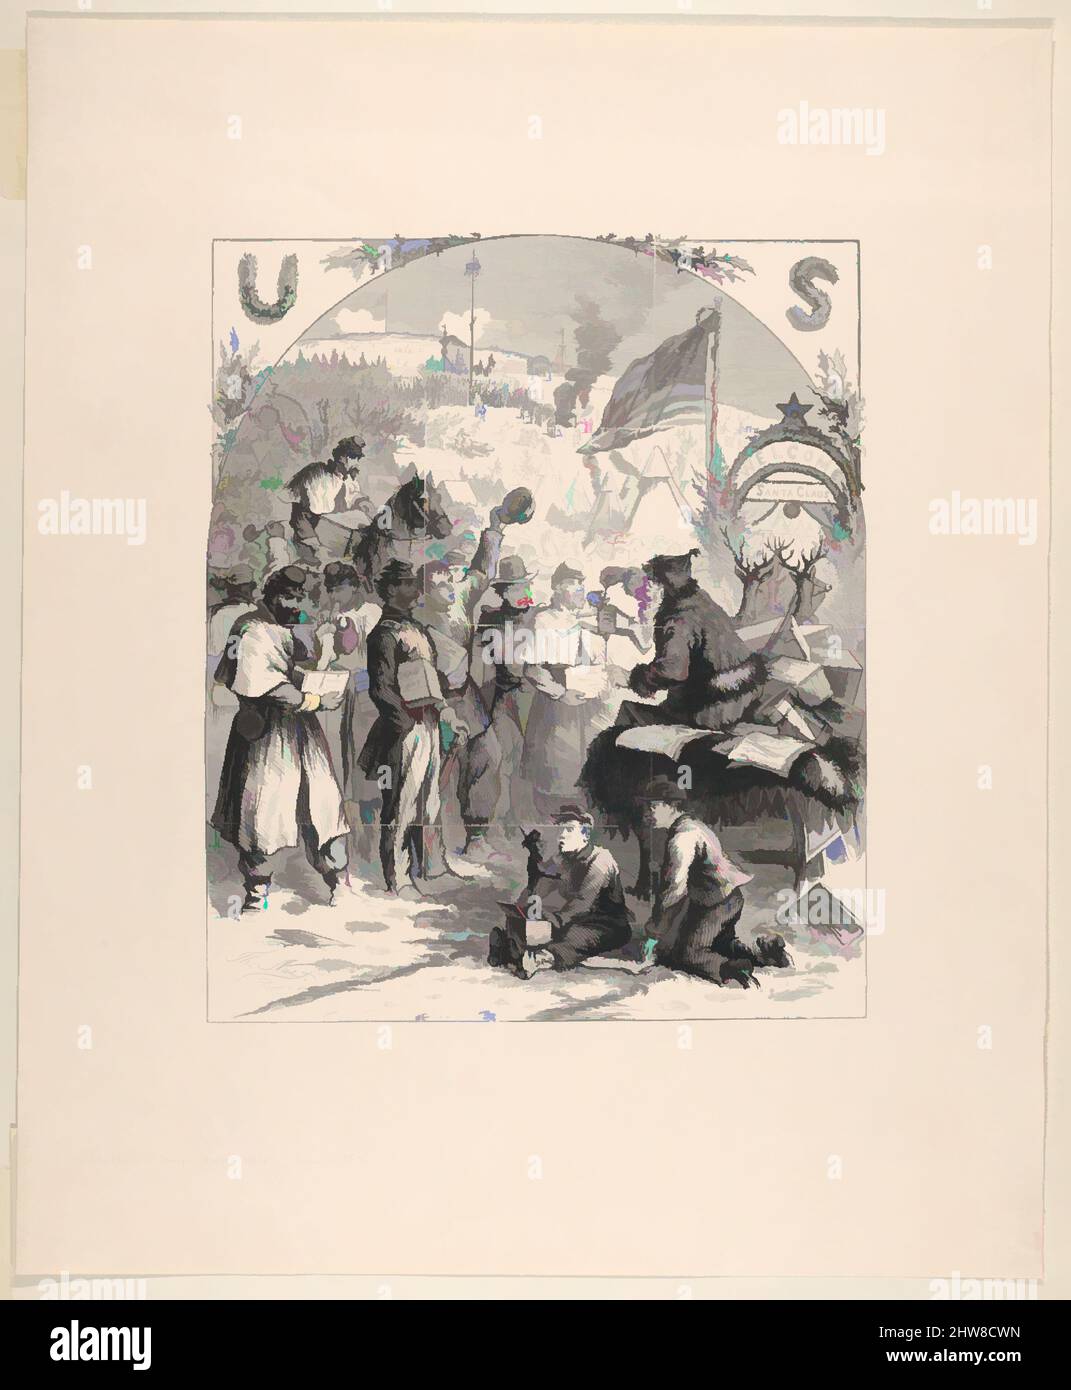 Art inspired by Santa Claus in Camp (published in Harper's Weekly, January 3, 1863), 1863 (?), Relief print and electrotype, Image: 10 3/4 × 9 1/8 in. (27.3 × 23.1 cm), Prints, Thomas Nast (American (born Germany), Landau 1840–1902 Guayaquil), Nast's image was published in the 1862, Classic works modernized by Artotop with a splash of modernity. Shapes, color and value, eye-catching visual impact on art. Emotions through freedom of artworks in a contemporary way. A timeless message pursuing a wildly creative new direction. Artists turning to the digital medium and creating the Artotop NFT Stock Photo